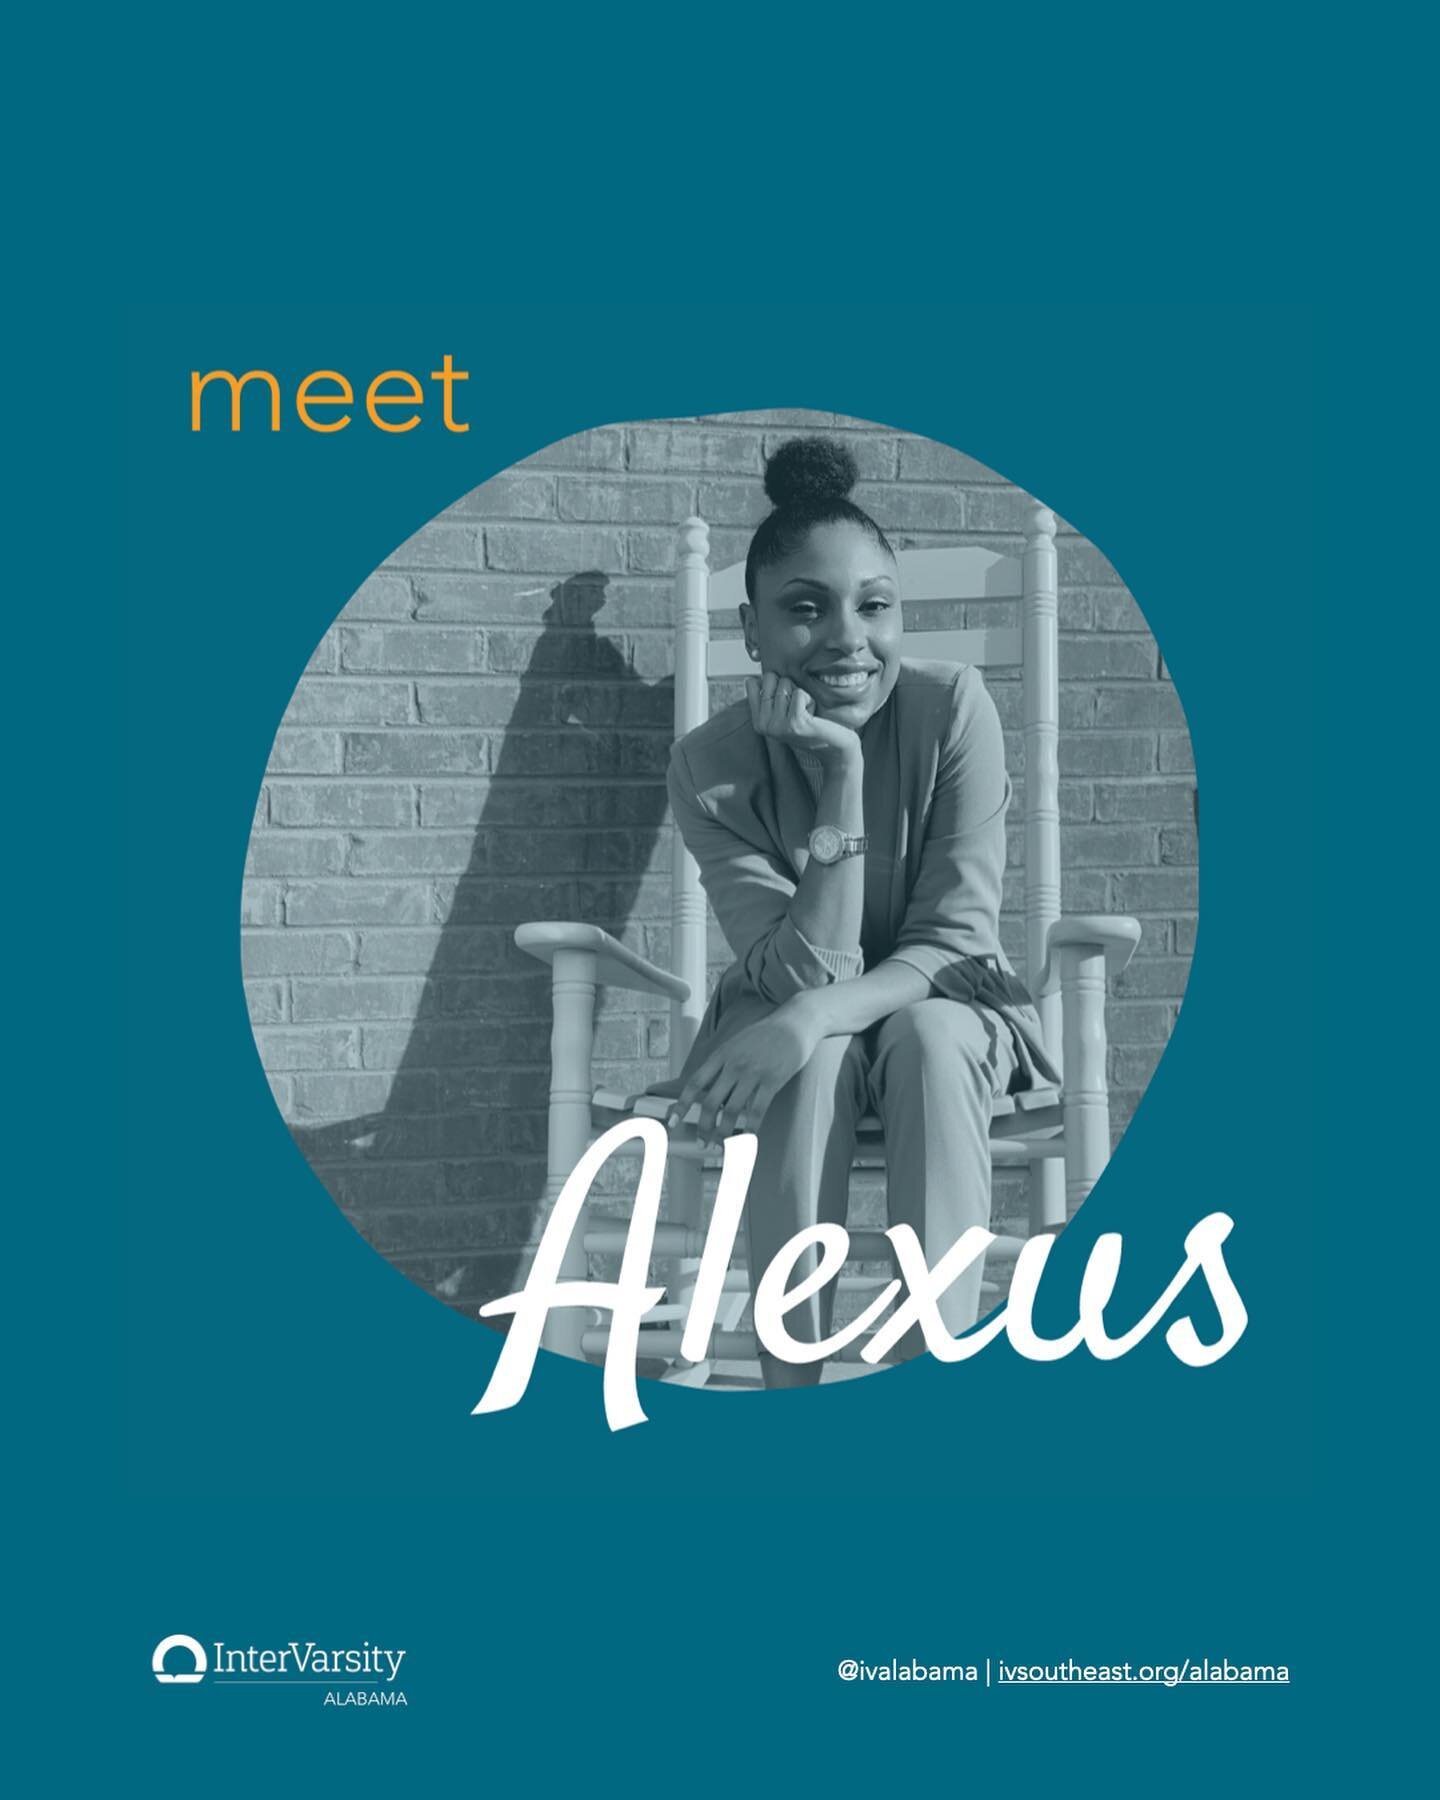 Meet Alexus! Alexus was a faithful member and leader in InterVarsity at UA as an undergraduate student, and we are grateful that she&rsquo;s still walking with us as a grad student! Alexus is passionate about justice and working out her faith in ever